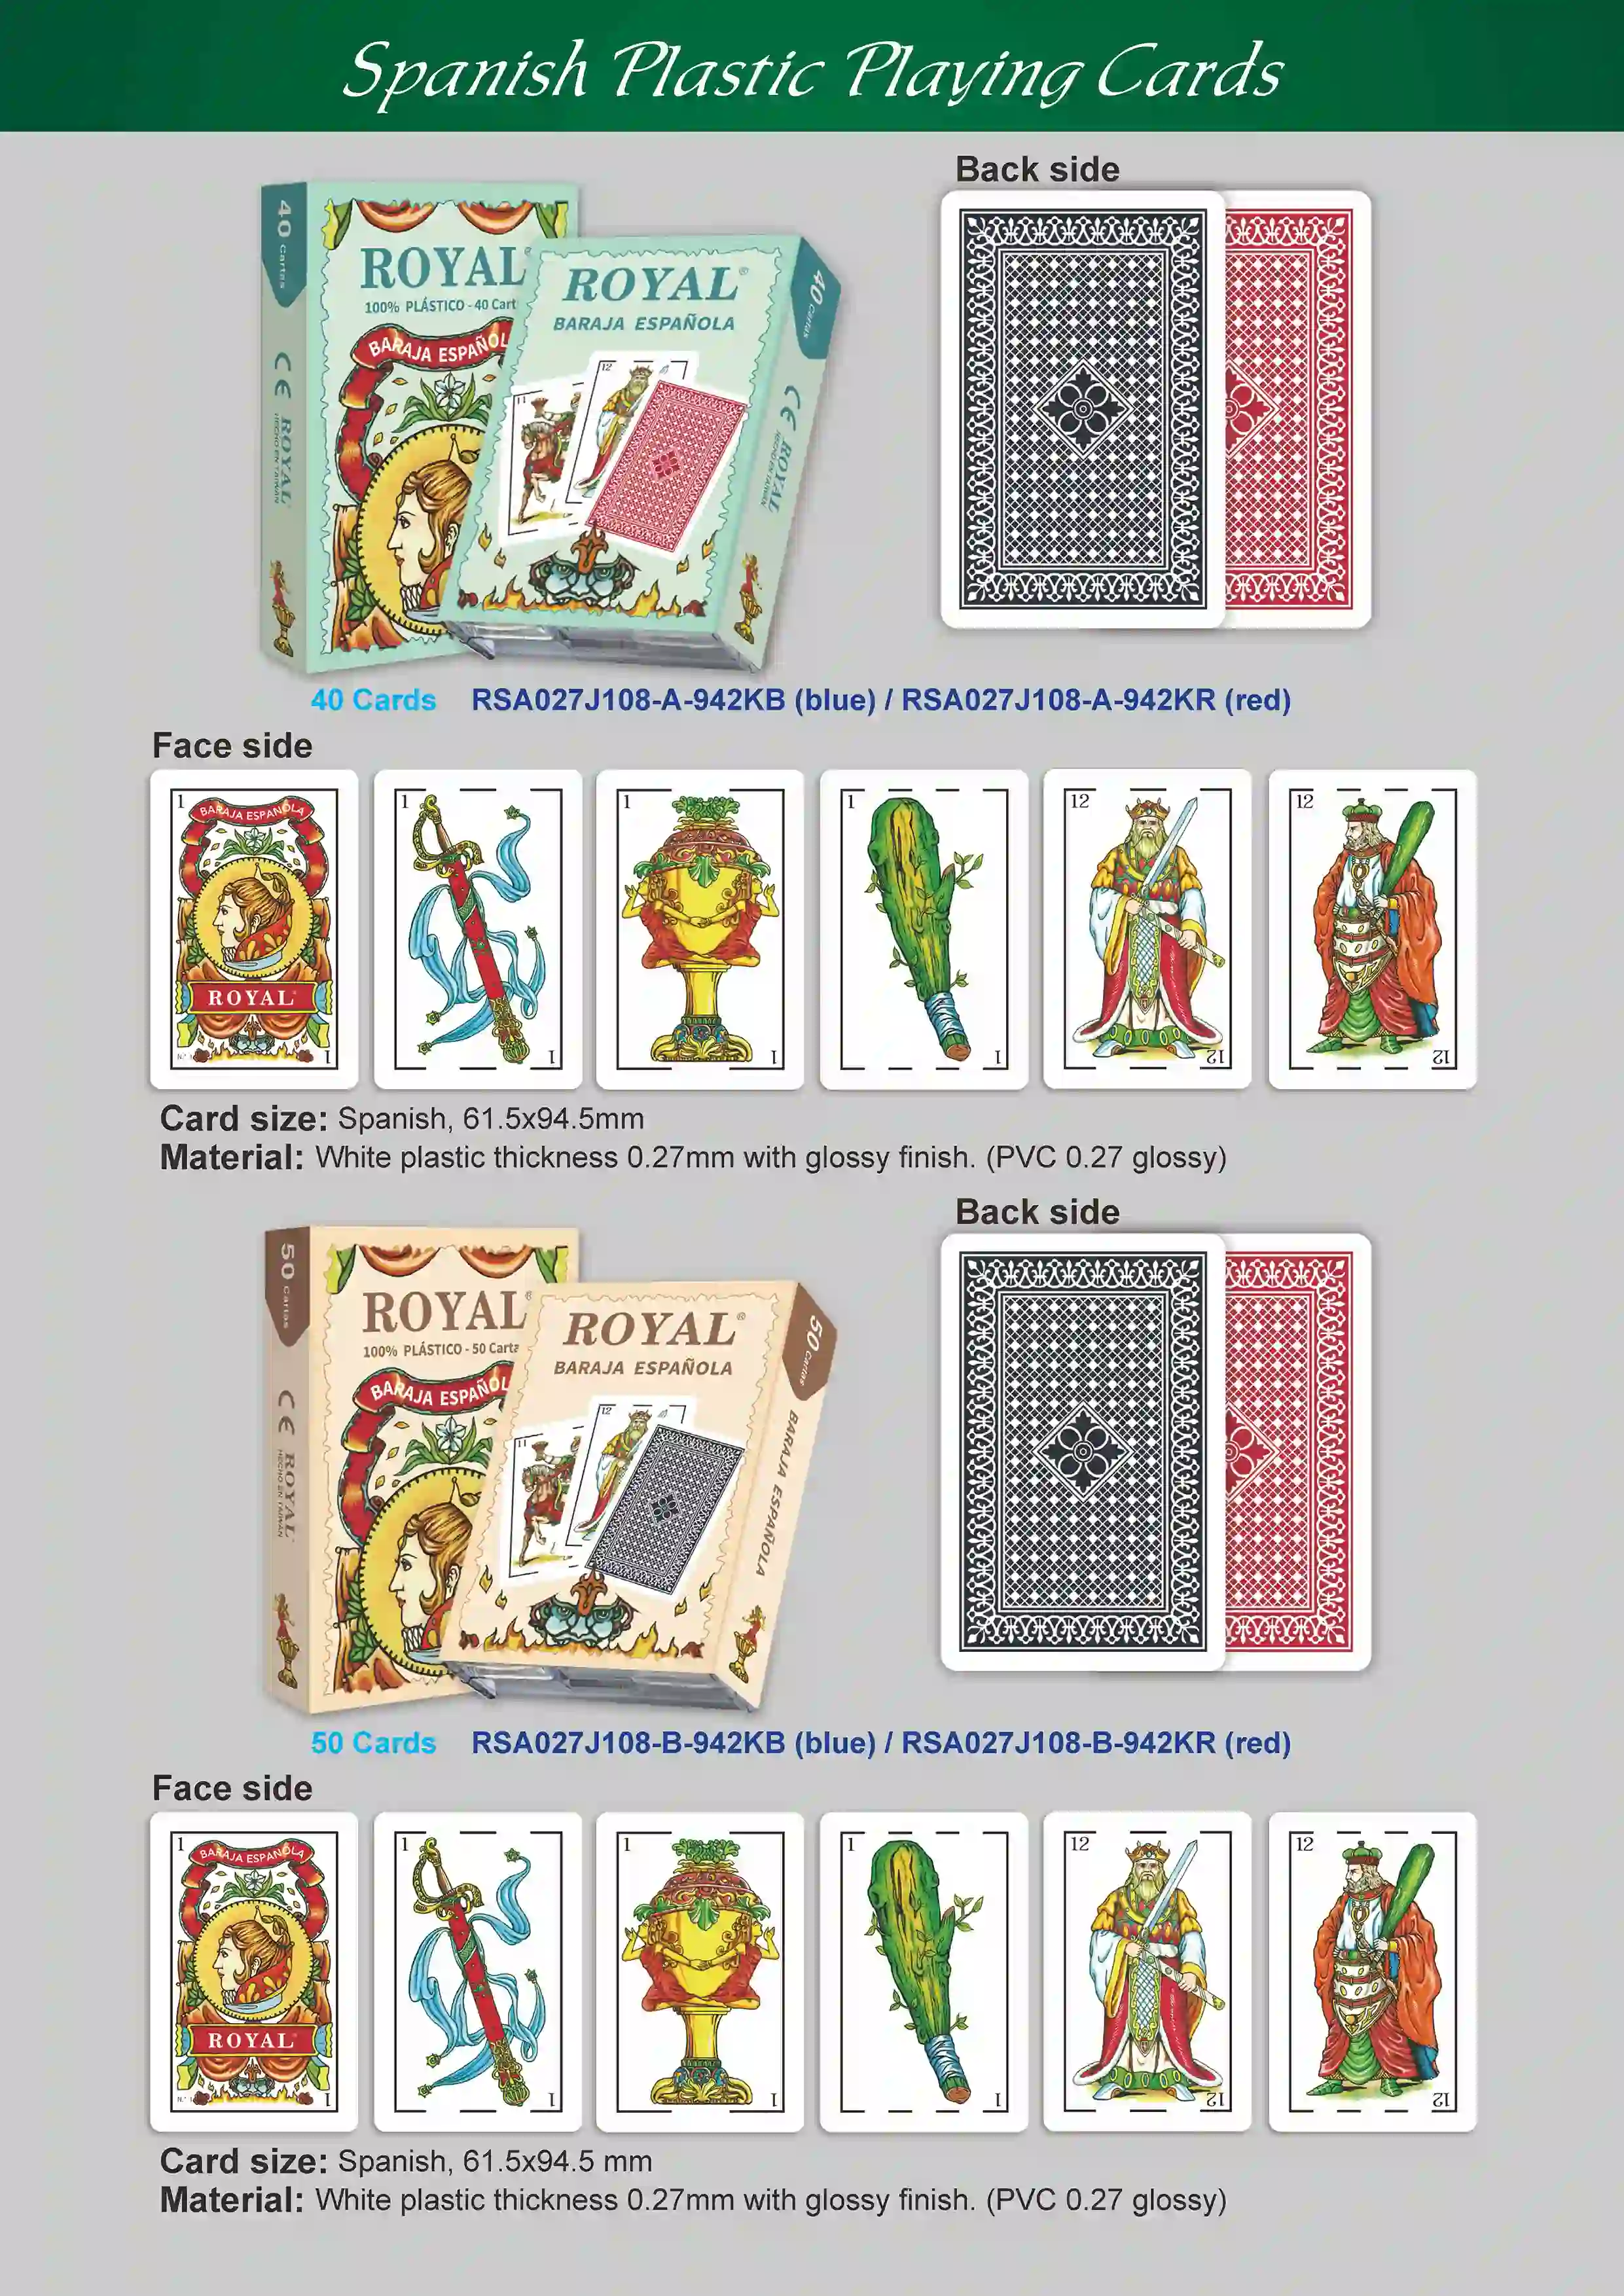 Spanish Plastic Playing Cards - 50 Cards